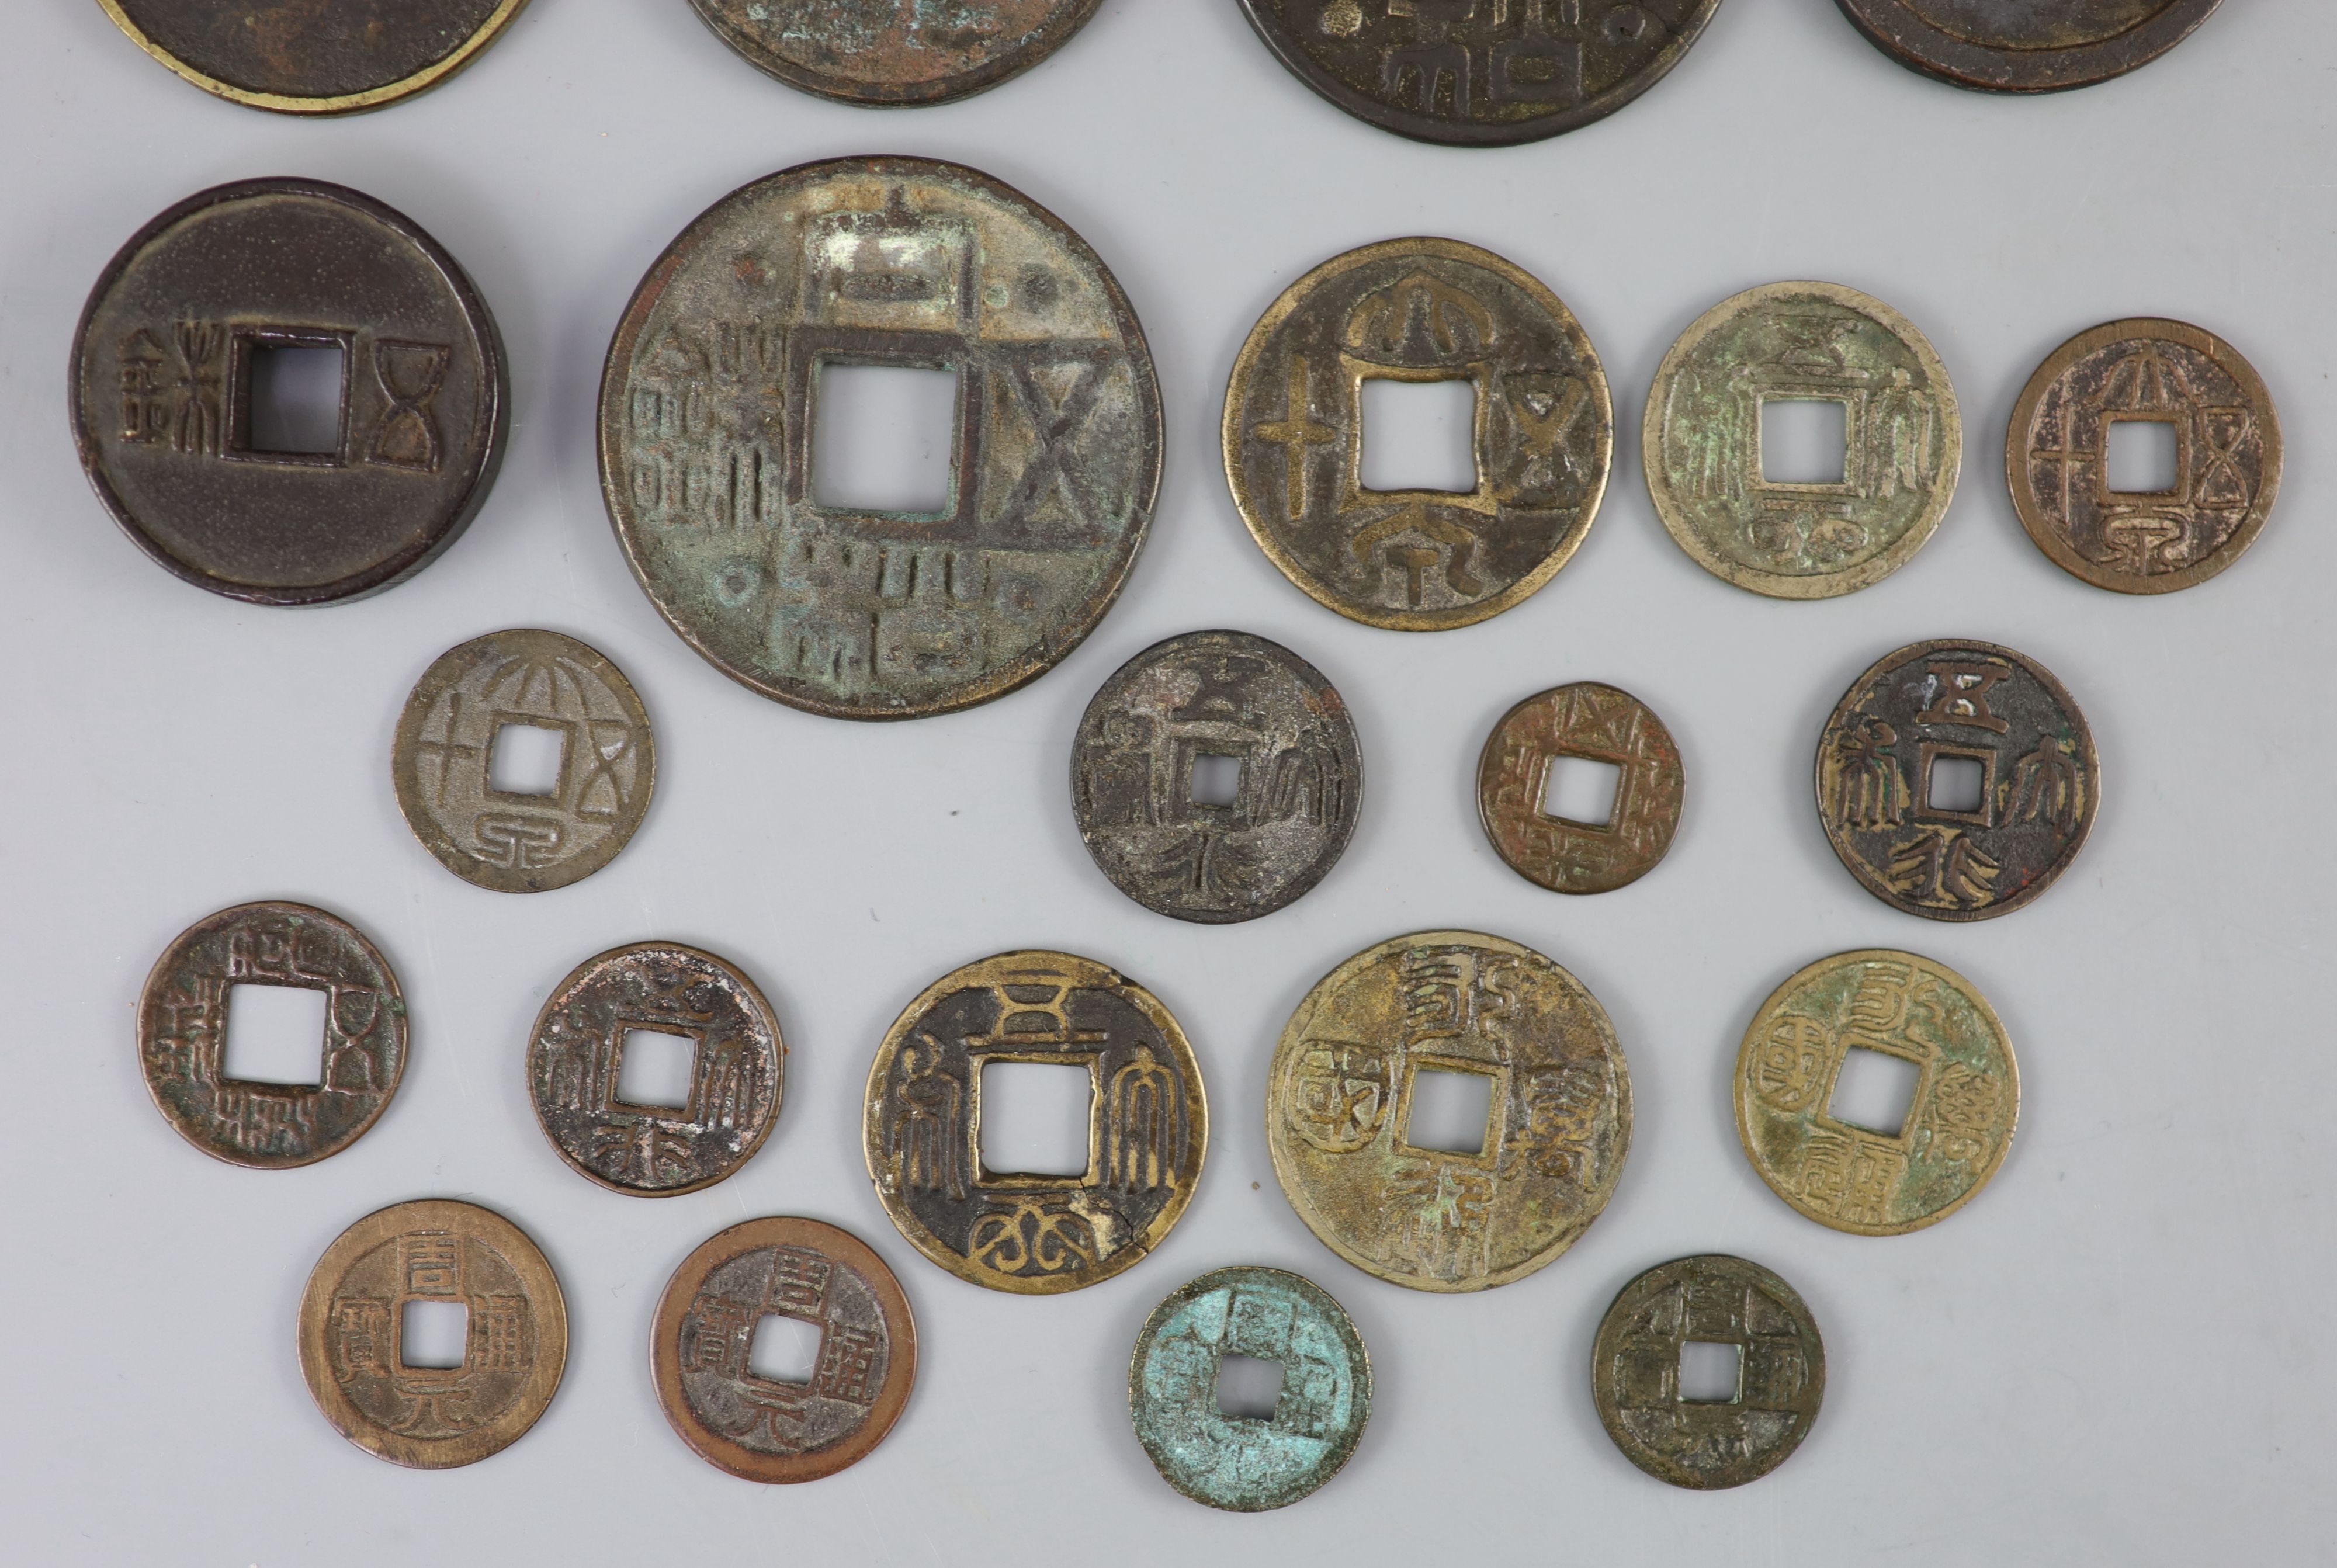 China, a group of 6 bronze coin charms or amulets, 19th century and various Thai (Siamese) porcelain gaming counters,